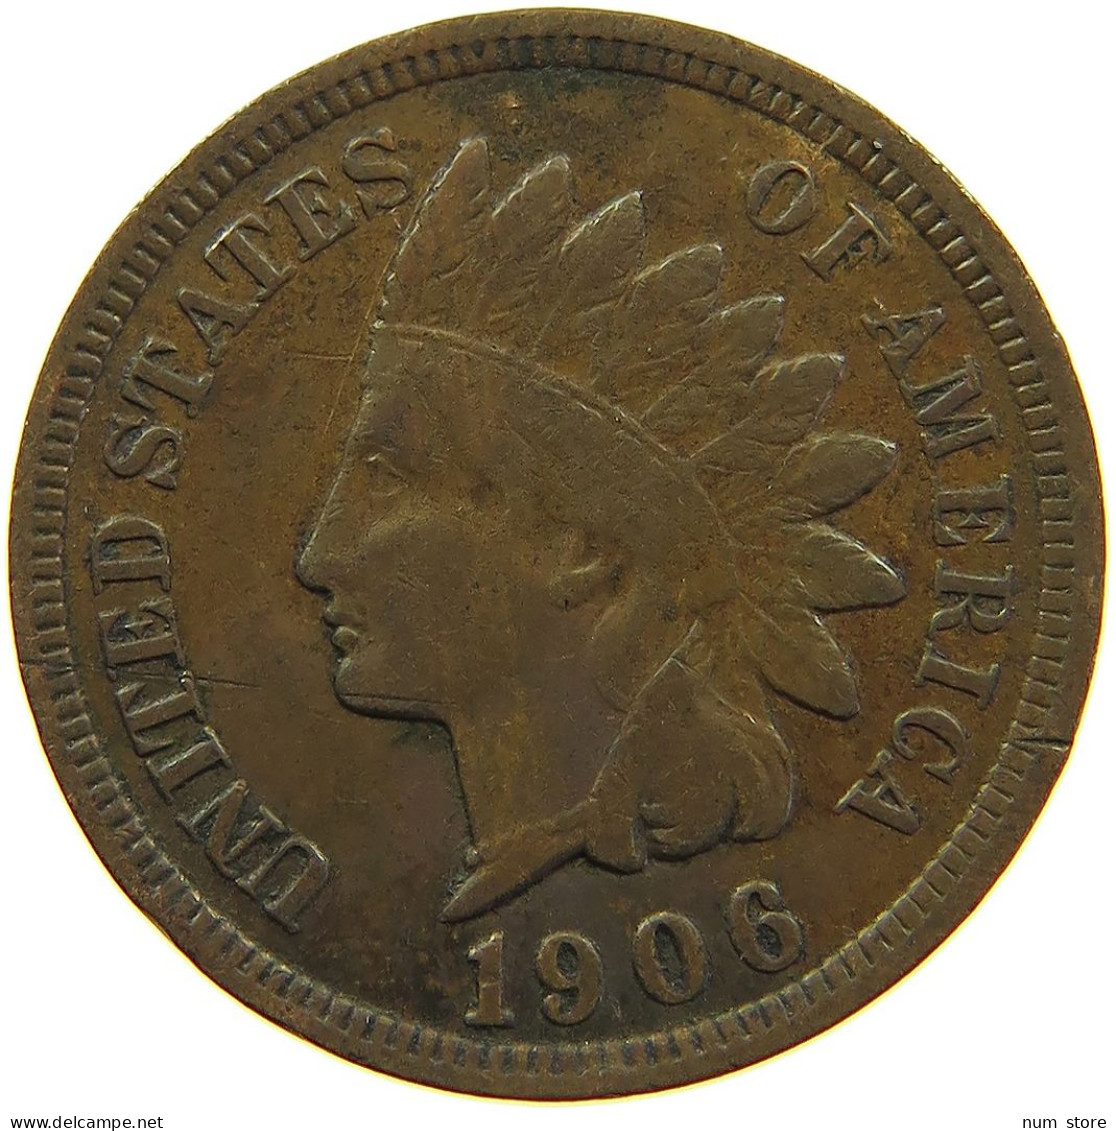 UNITED STATES OF AMERICA CENT 1906 INDIAN HEAD #s091 0379 - 1859-1909: Indian Head